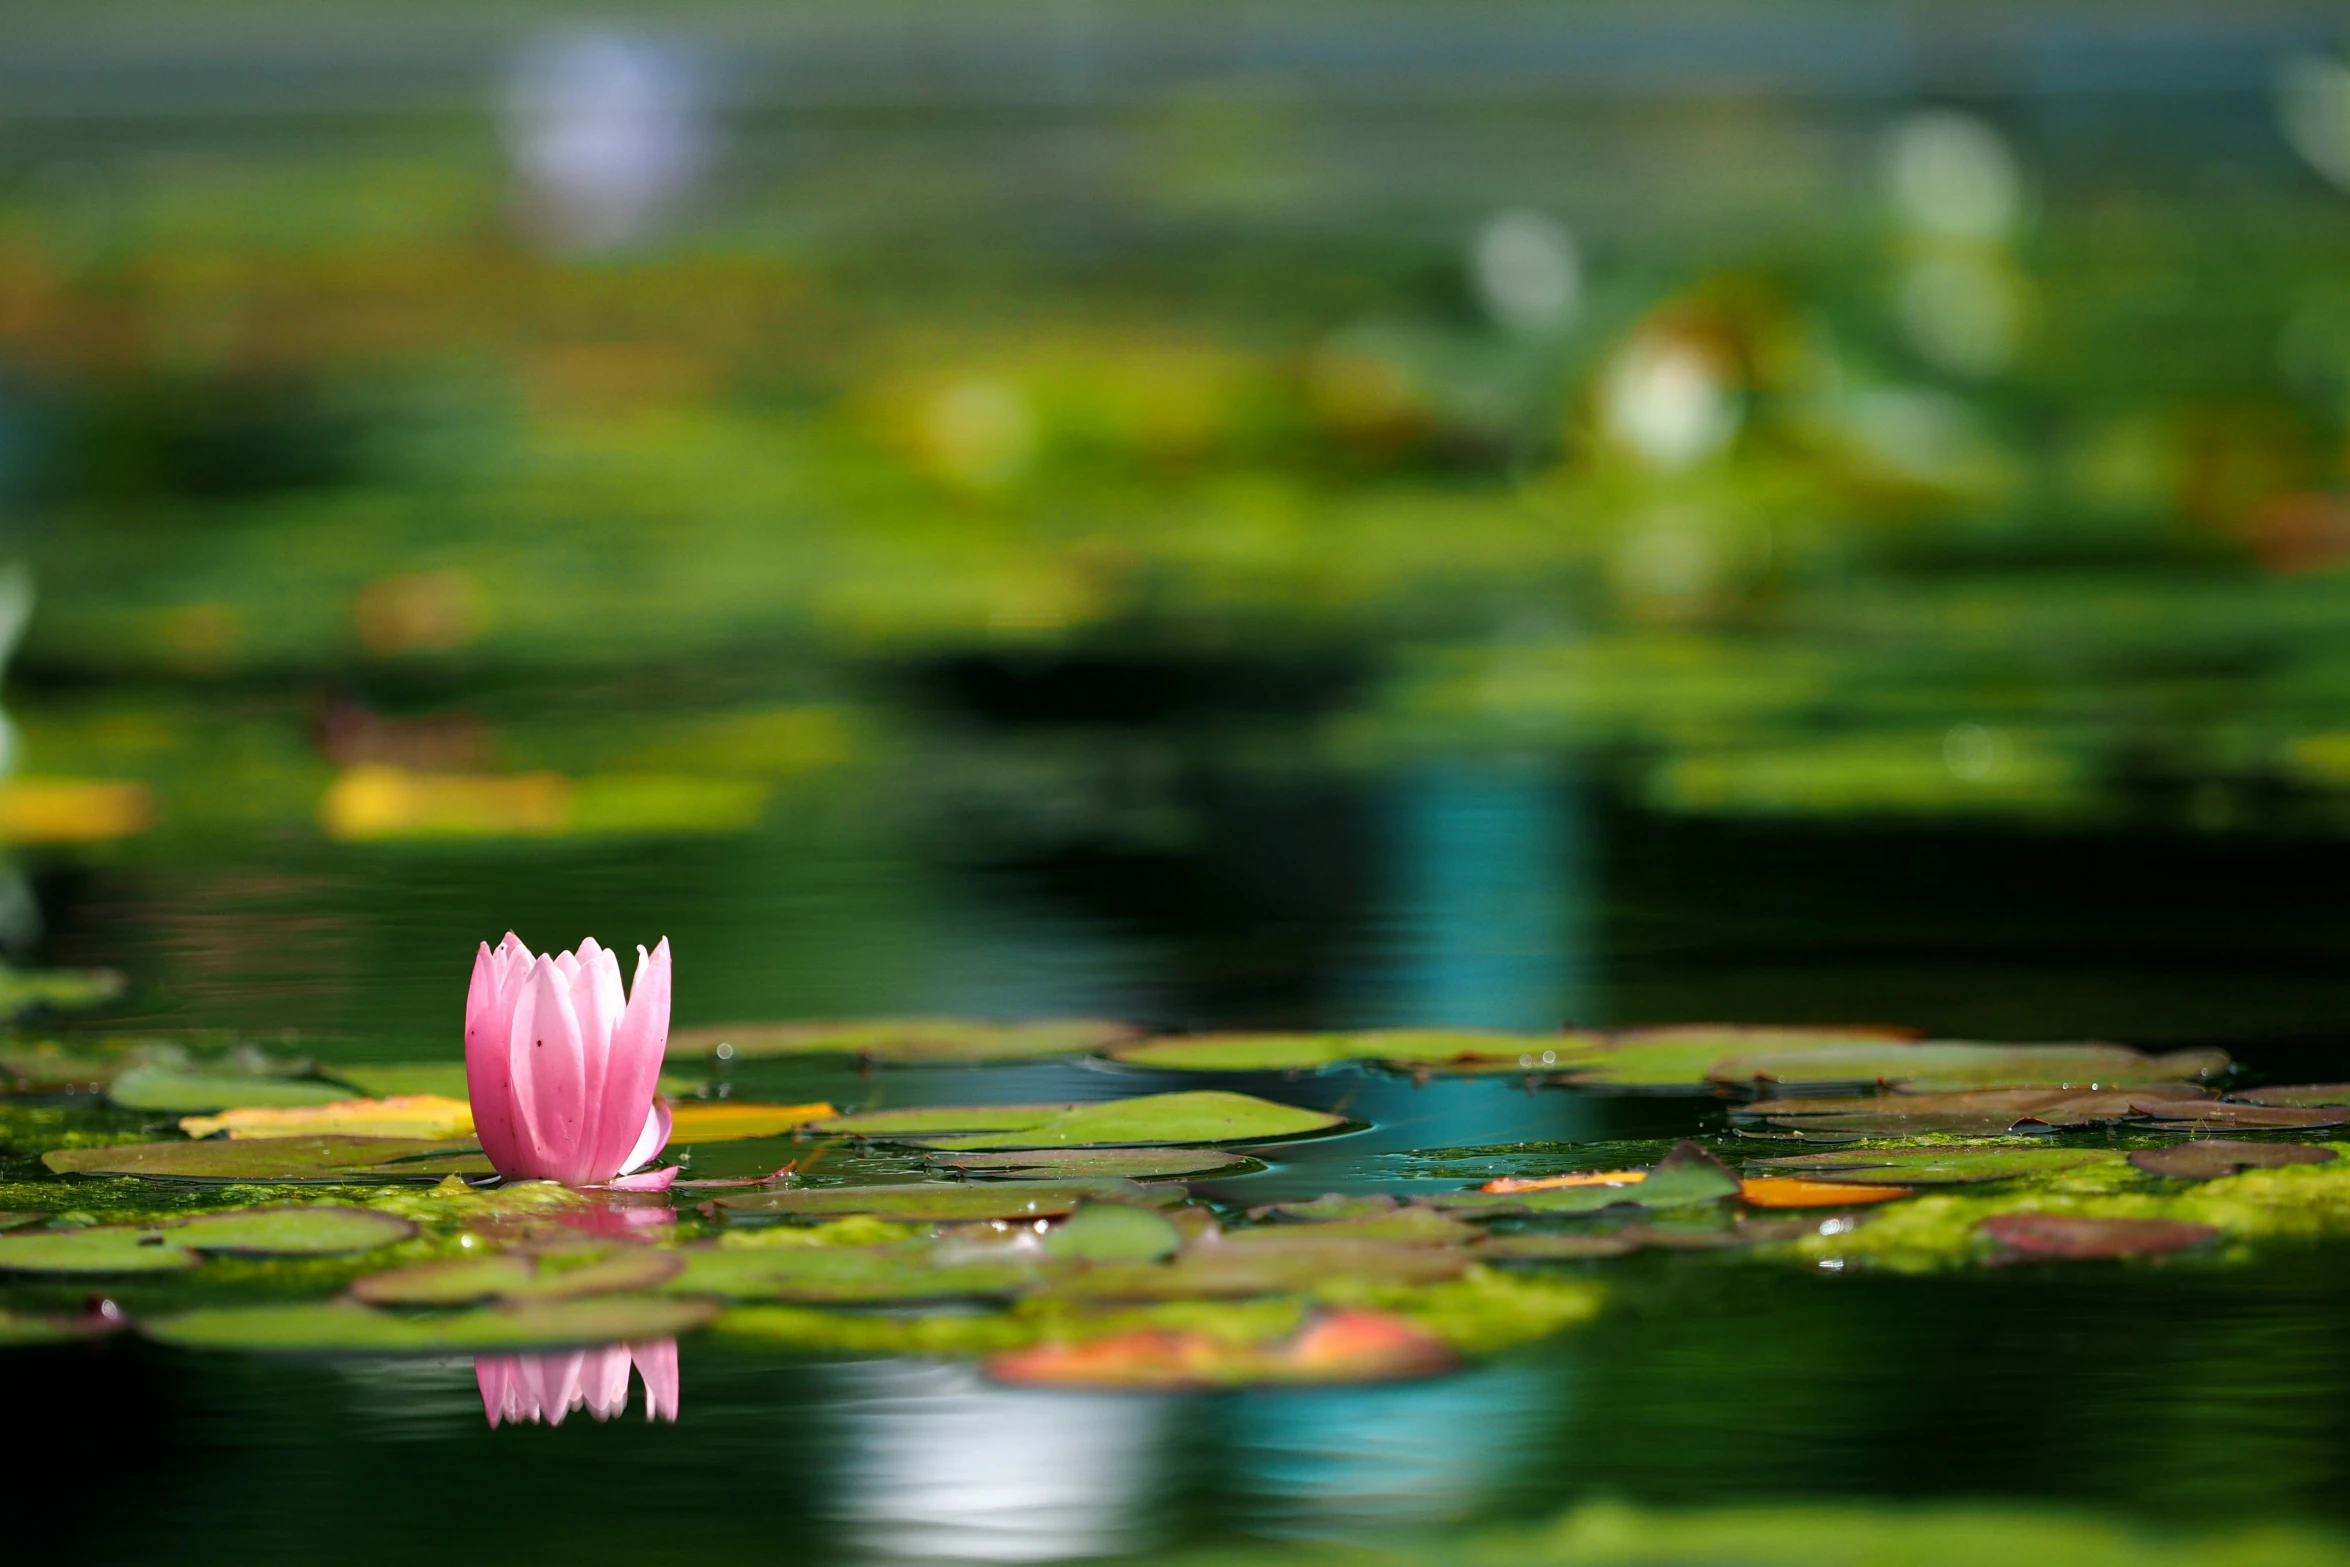 pink waterlily in a pond with lily pads